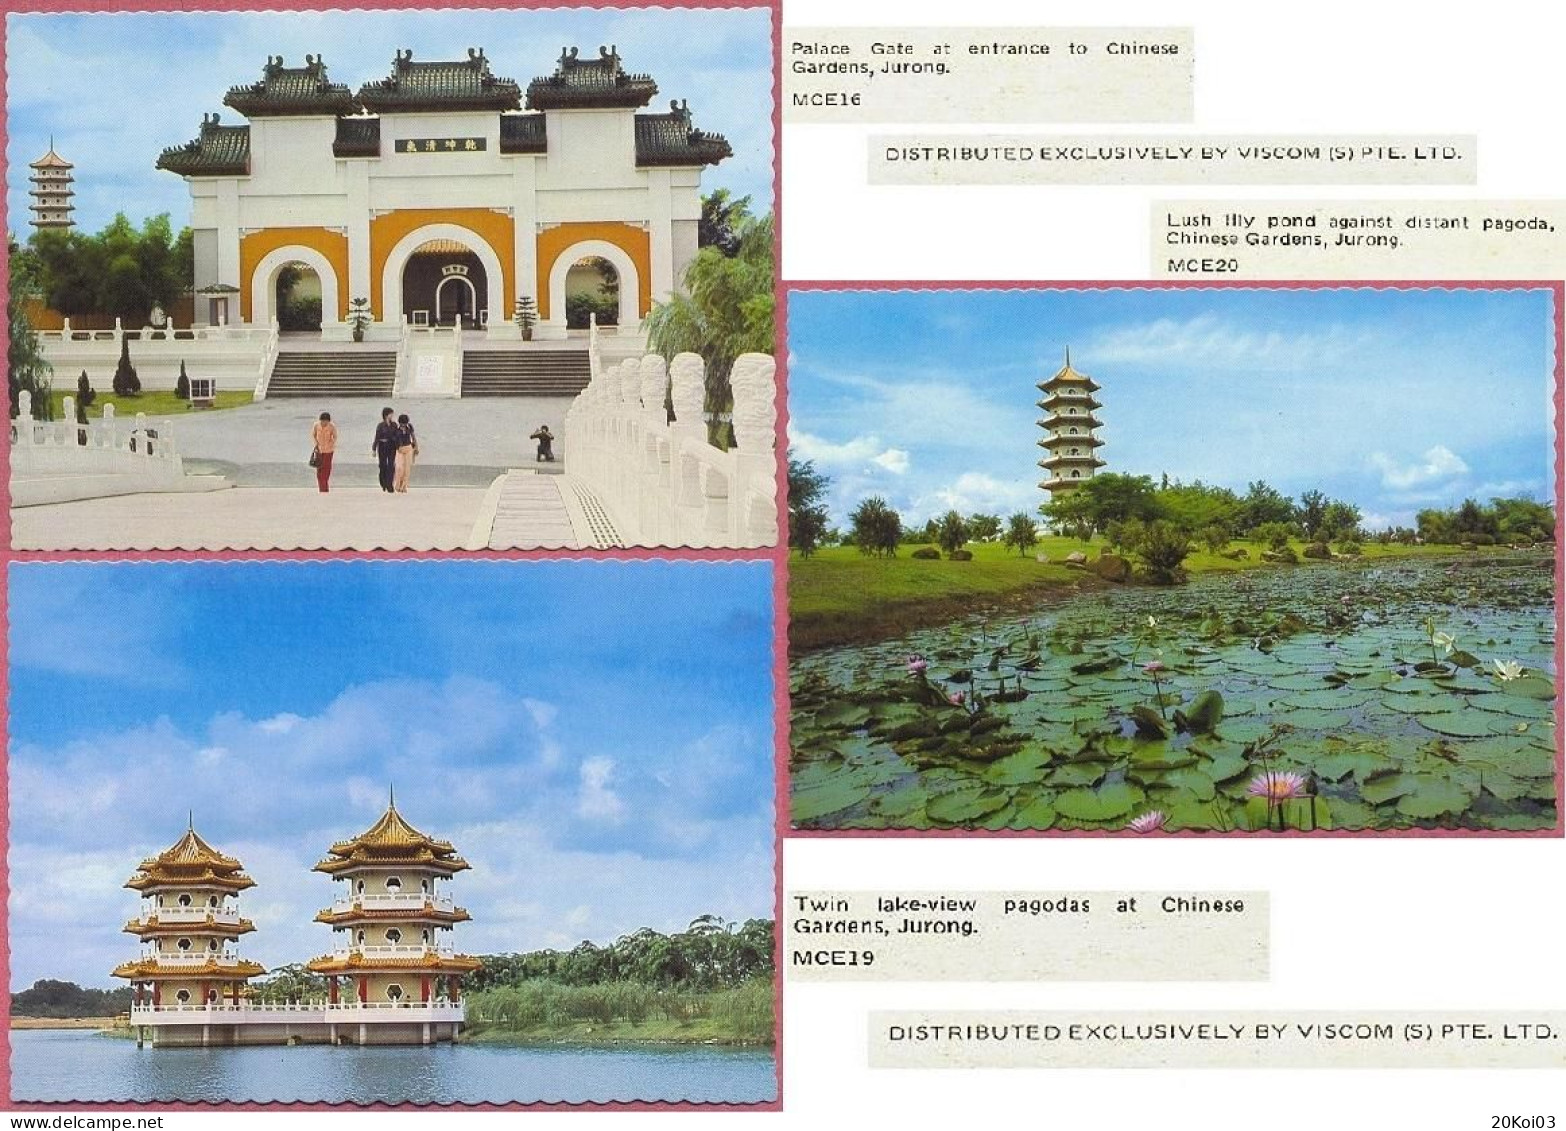 Singapore Chinese Gardens, Jurong 1978's MCE16-19-20 DISTRIBUTED EXCLUSIVELY BY VISCOM (S) PTE. LTD. Vintage UNC_cpc - Singapur